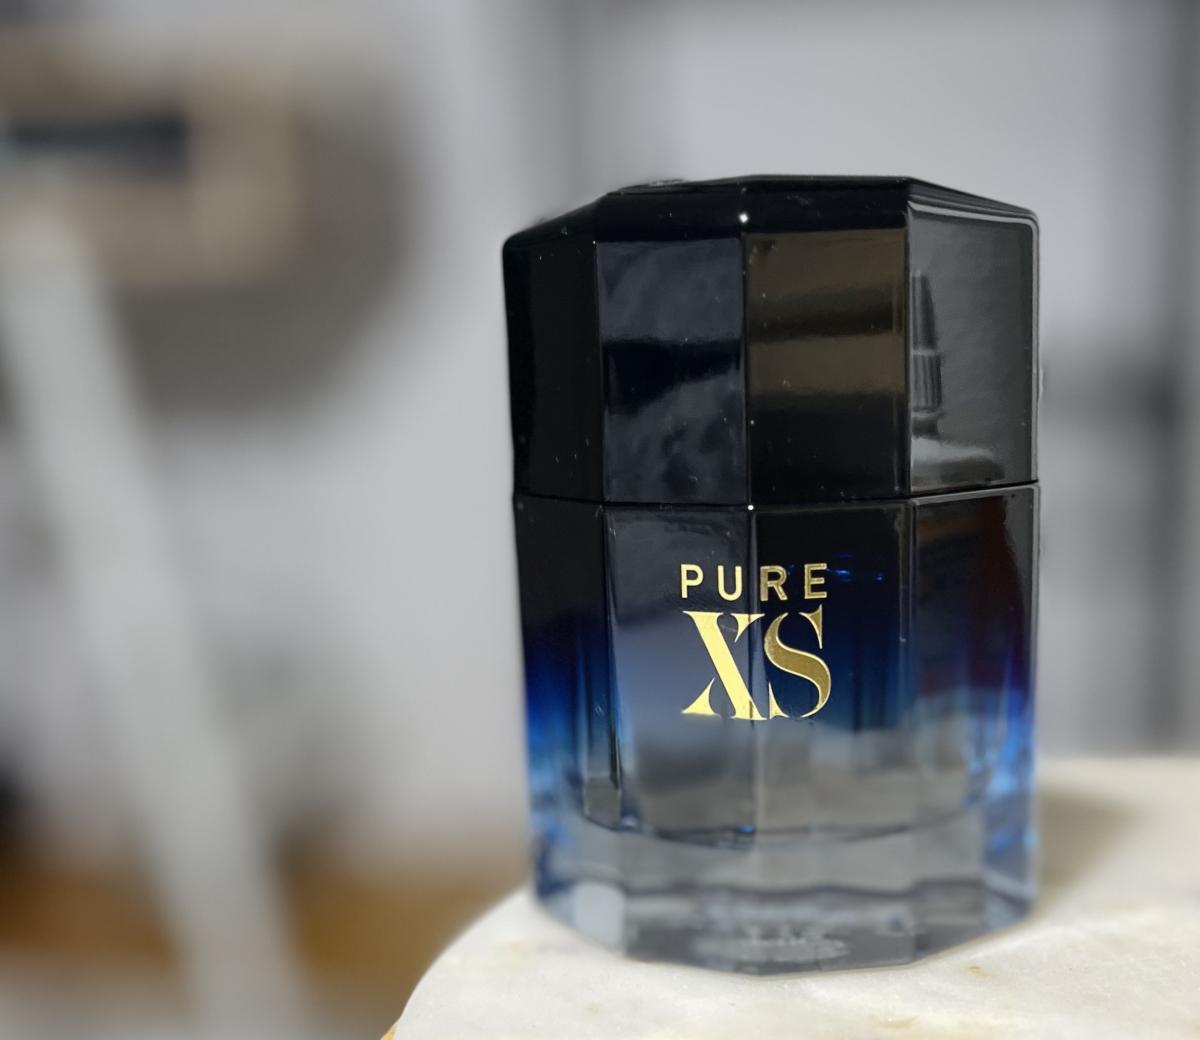 Pure XS Paco Rabanne cologne - a fragrance for men 2017